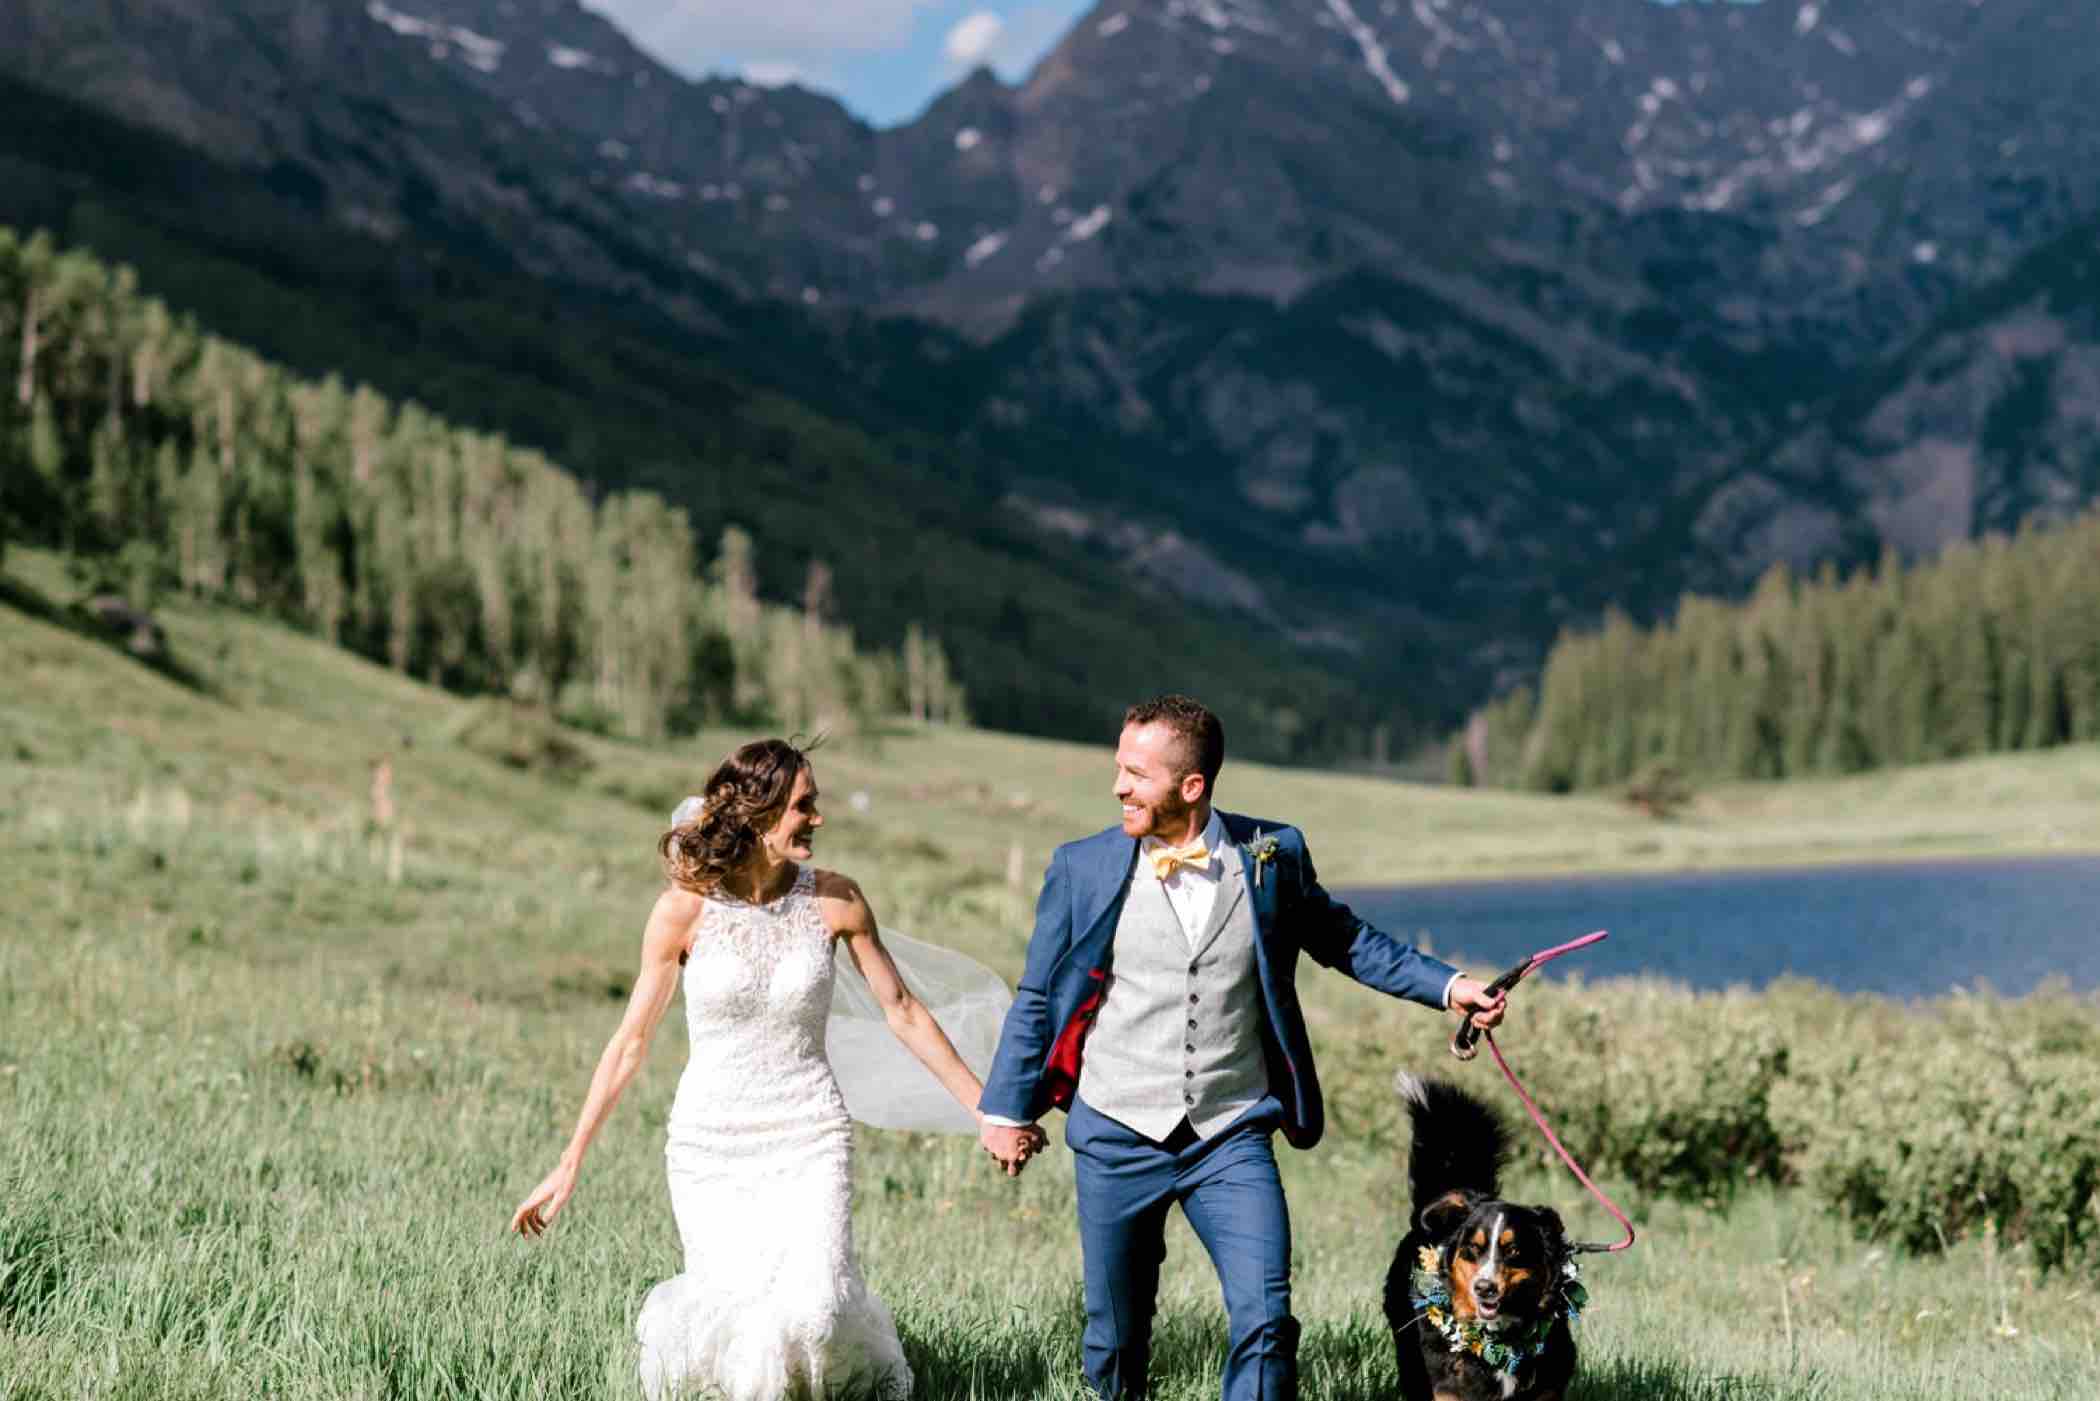 Bride and groom walk with their Bernese Mountain dog Lucie following their wedding ceremony at Piney River Ranch. The Rocky Mountains are visible behind them. Photo by Ali and Garrett, Romantic, Adventurous, Nostalgic Wedding Photographers.